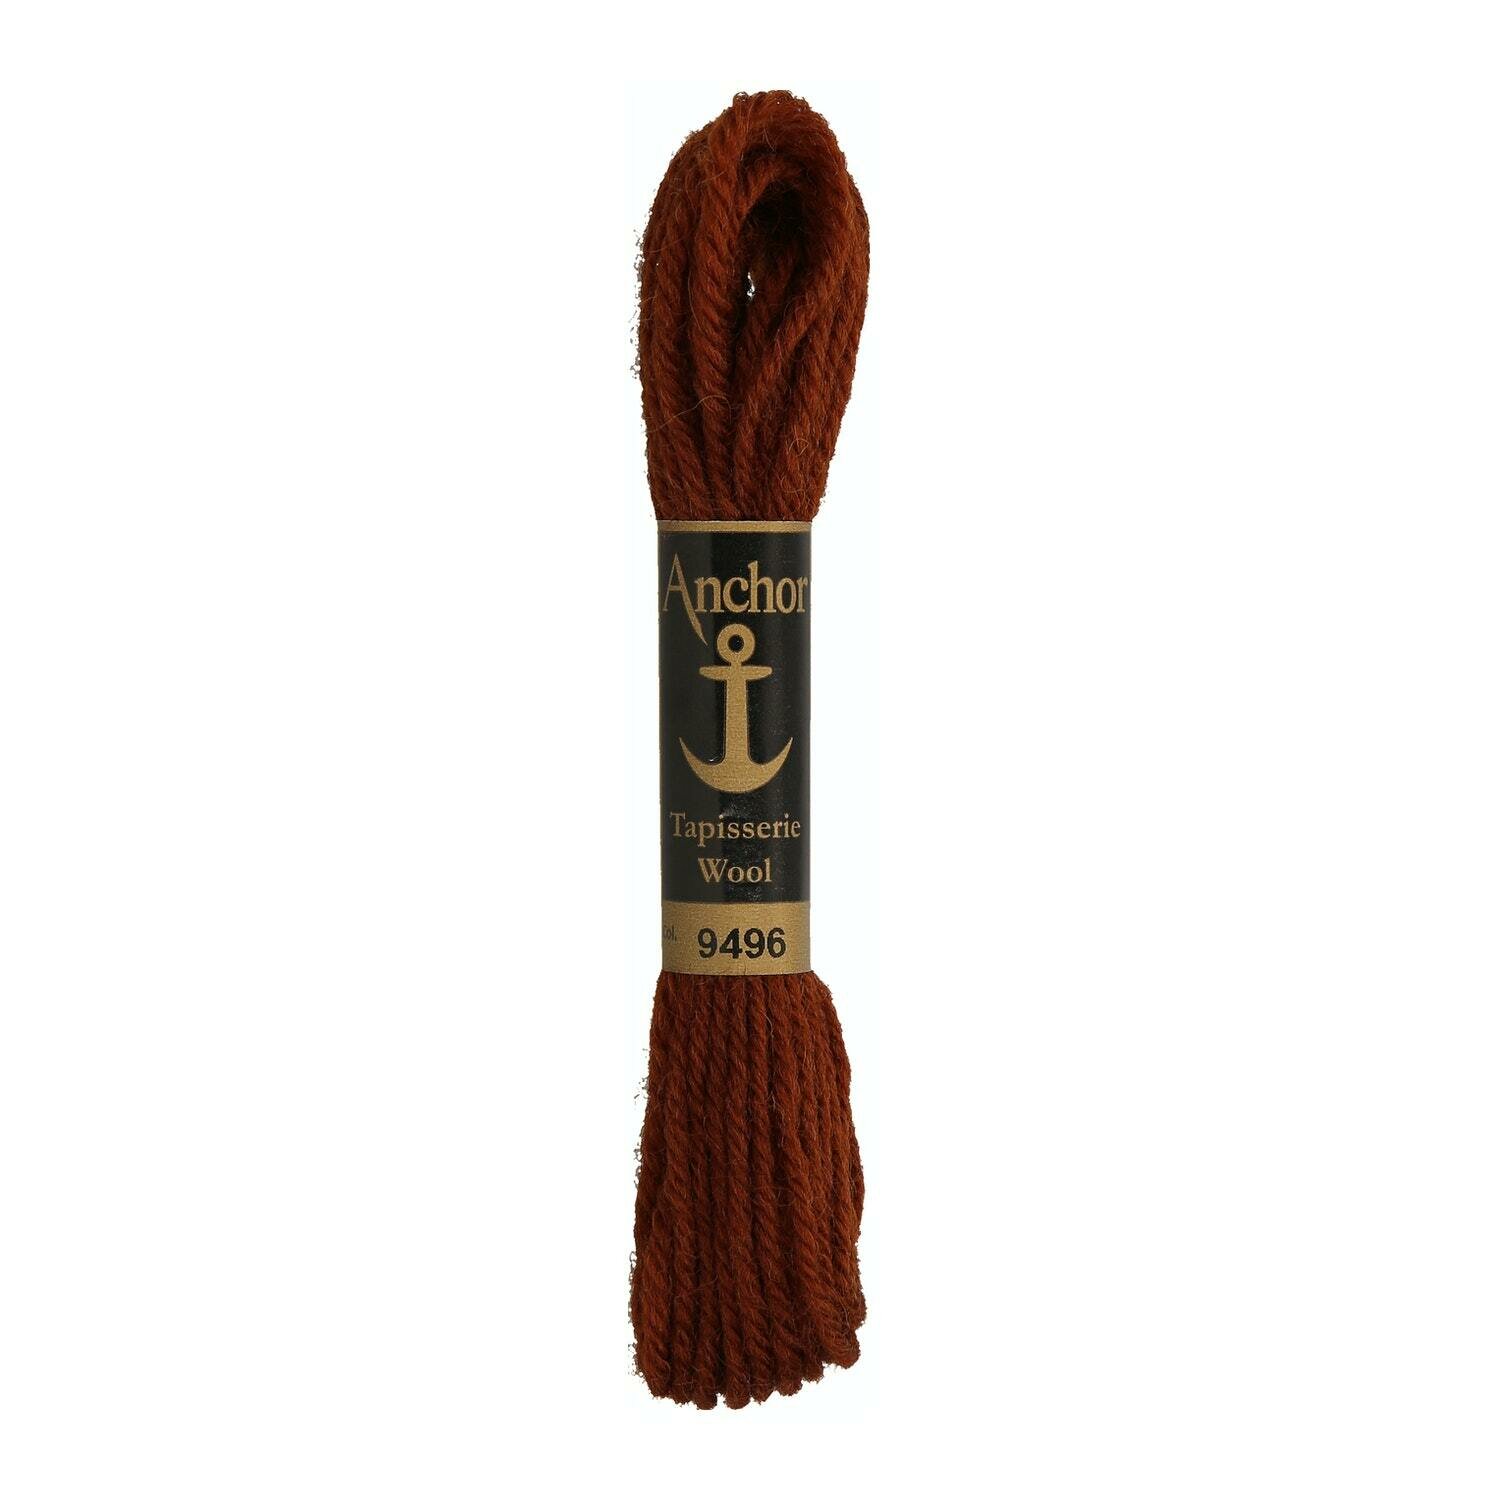 Anchor Tapisserie Wool # 09496